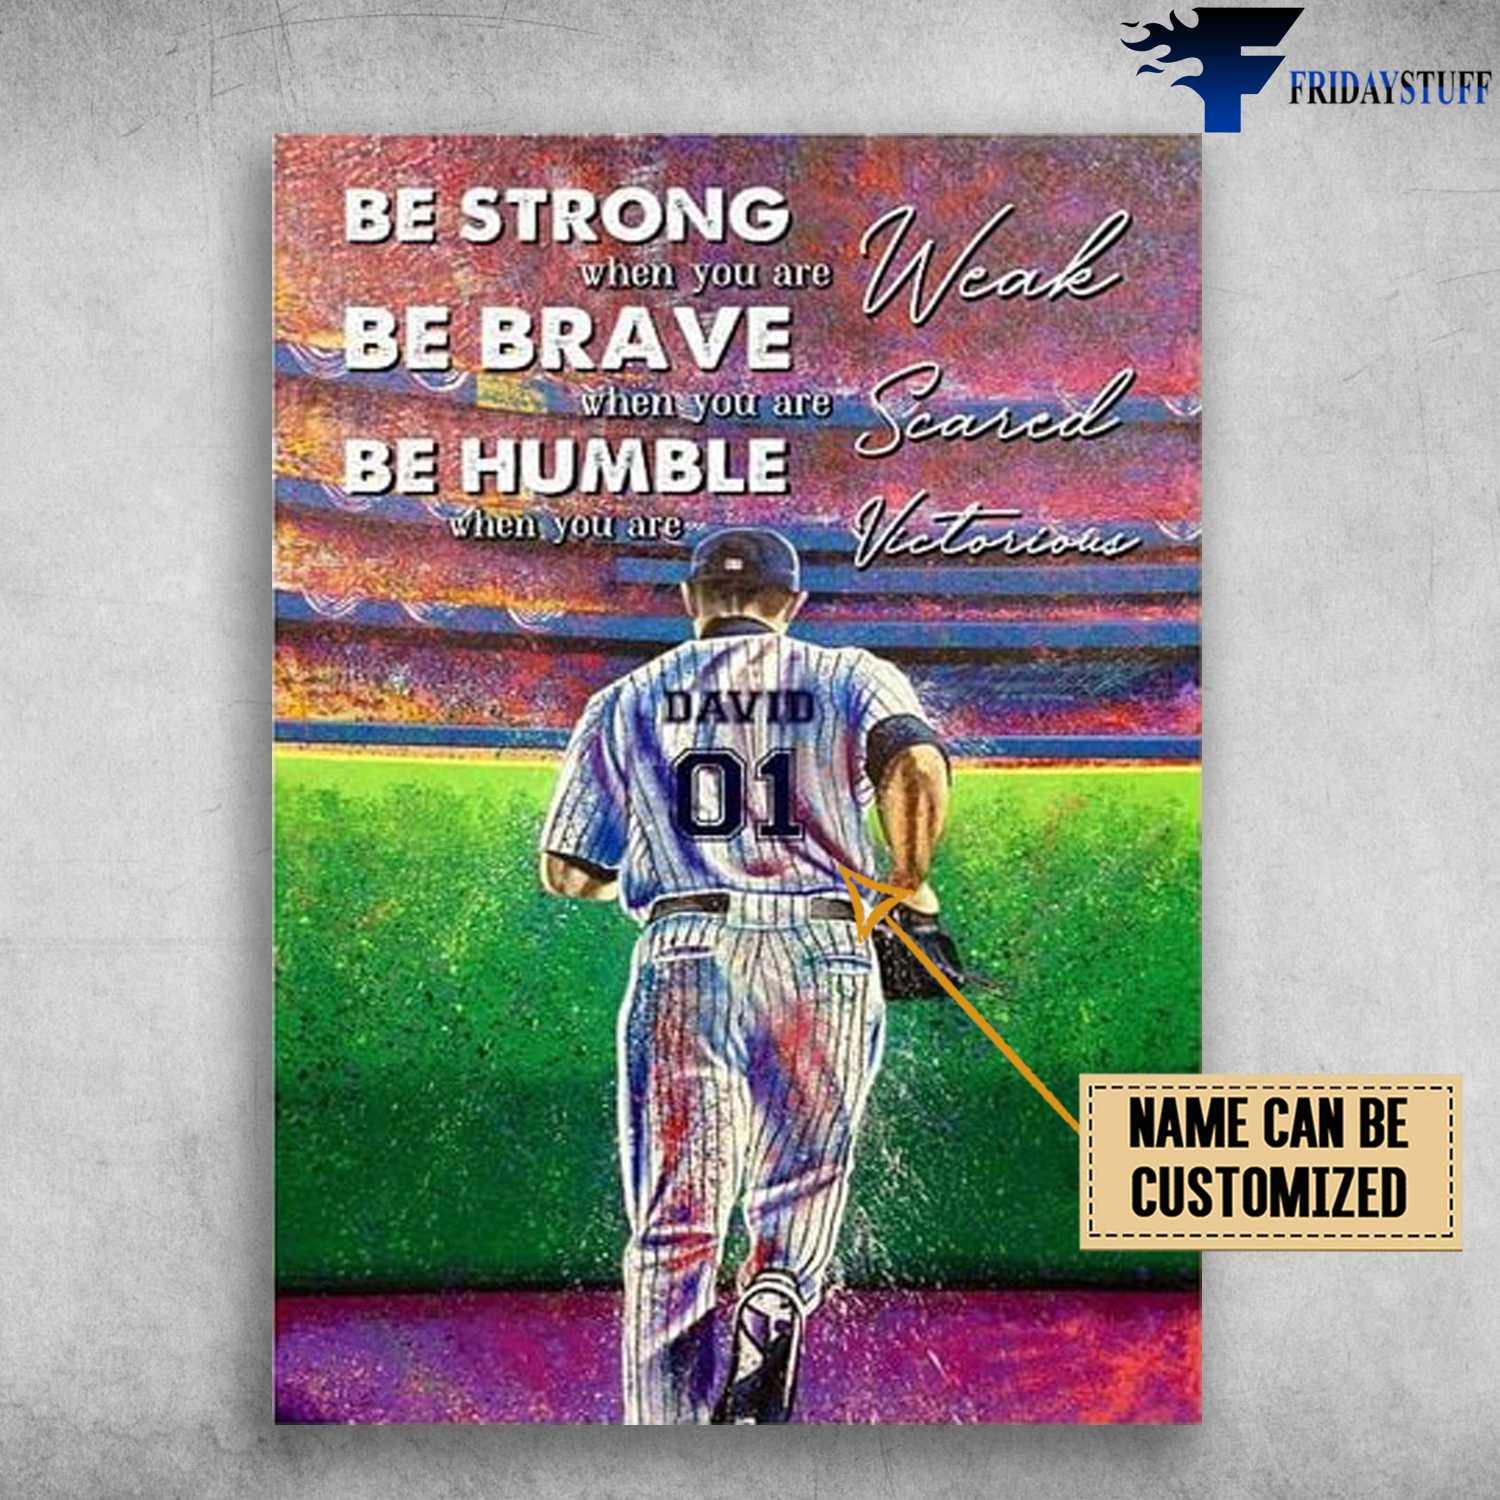 Baseball Player - Be Strong When You Are Weak, Be Brave When You Are Scared, Be Humble When You Are Victorious, Baseball Poster